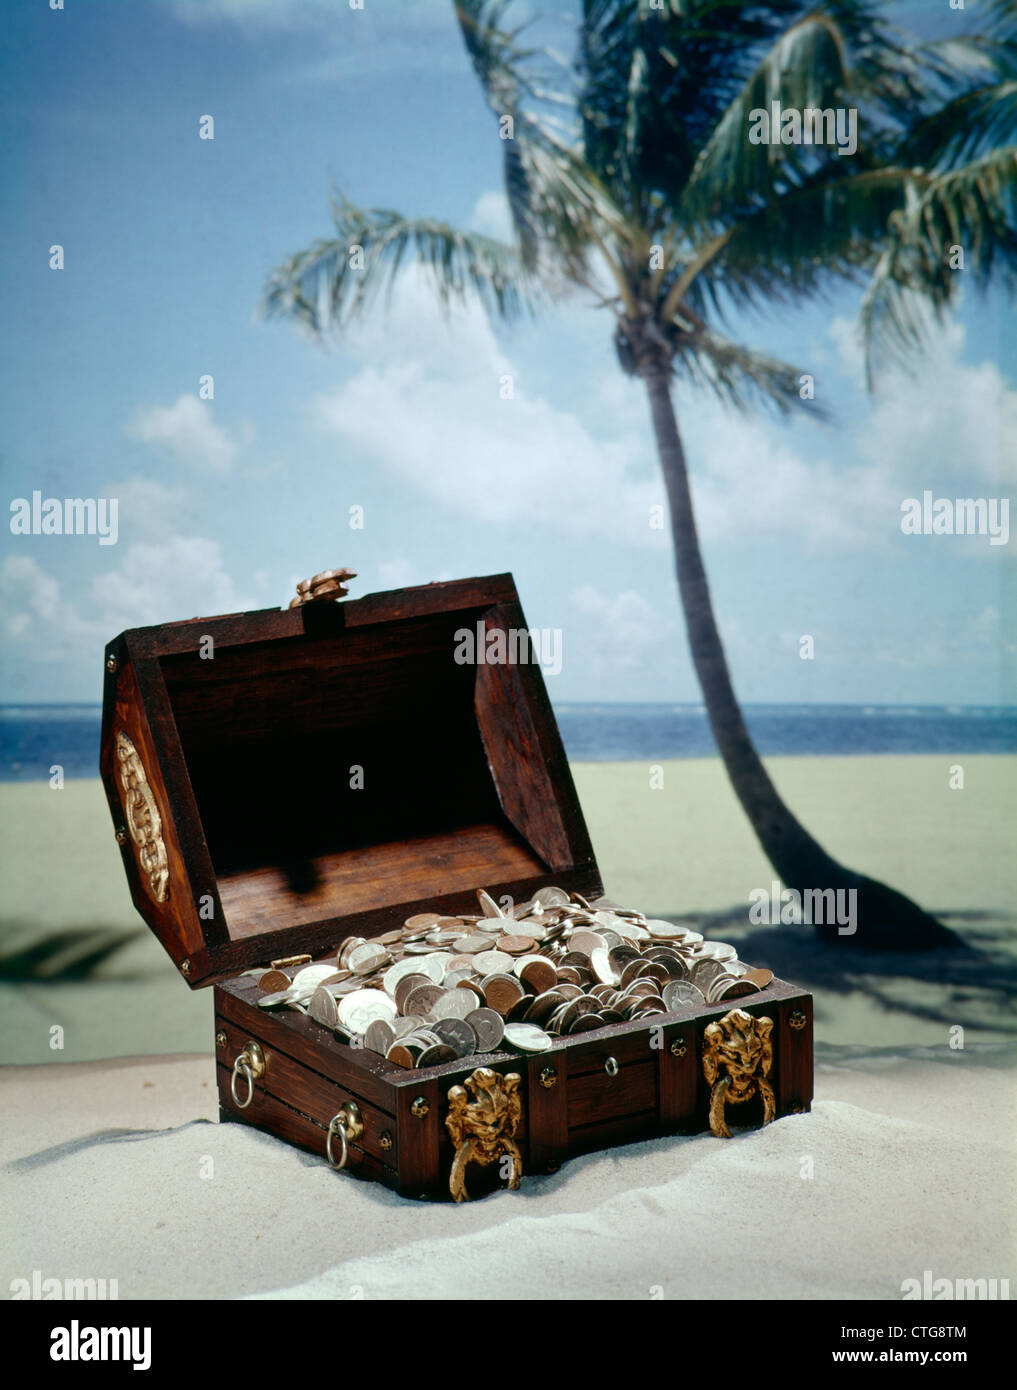 1960s PIRATE TREASURE CHEST FULL COINS ON TROPICAL BEACH Stock Photo